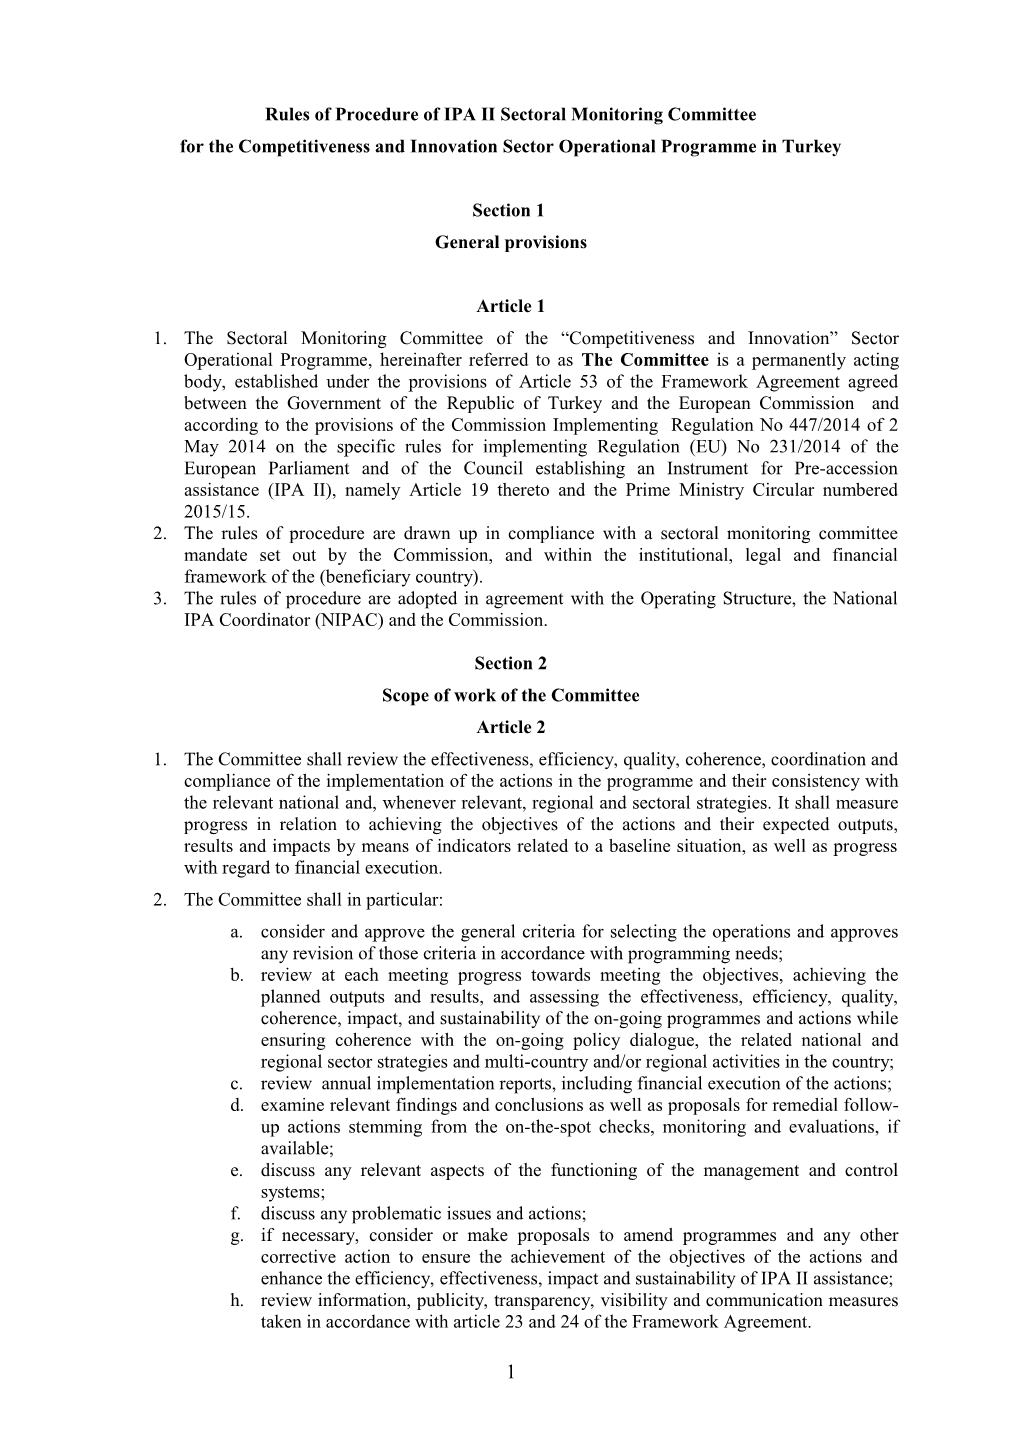 Draft Rules of Procedure of the IPA Sectoral Monitoring Committee for Regional Competitiveness